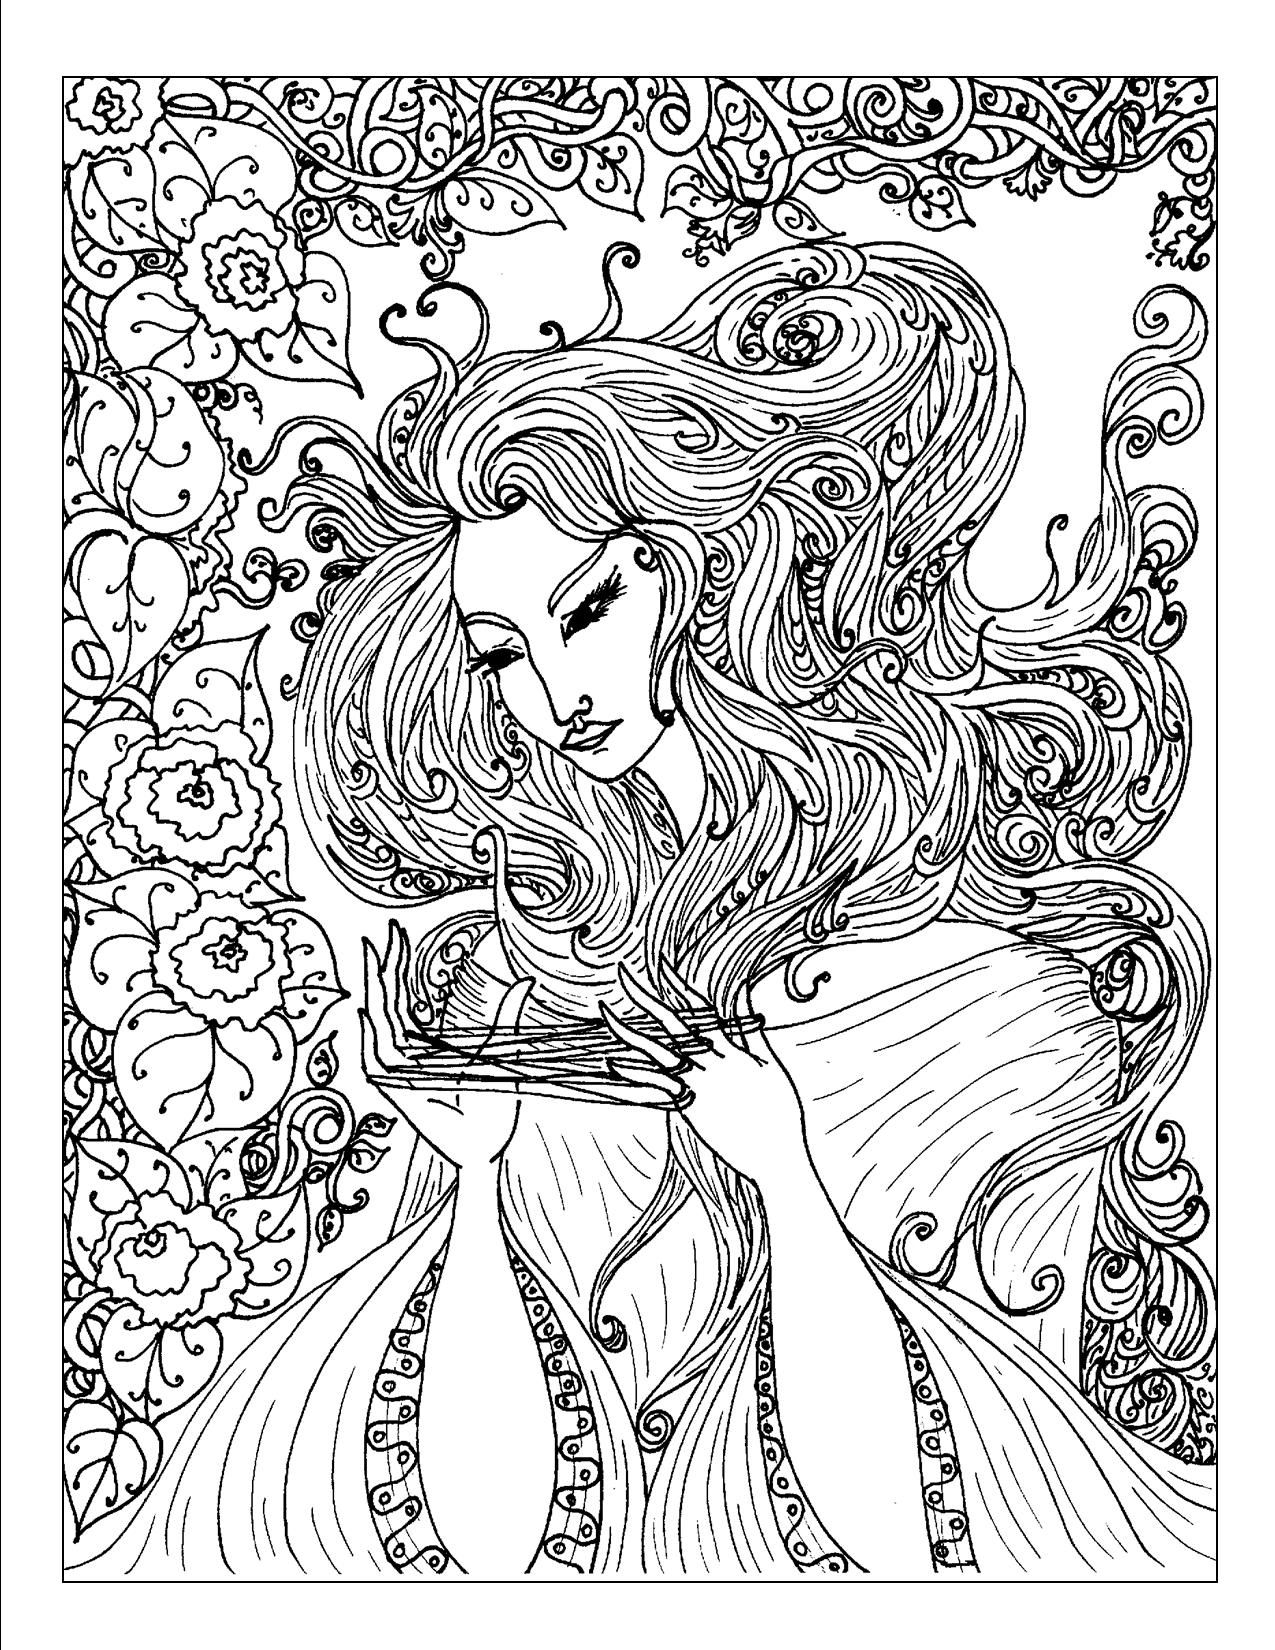 Difficult Coloring Pages For Adults At Getcolorings Com Free Printable Colorings Pages To